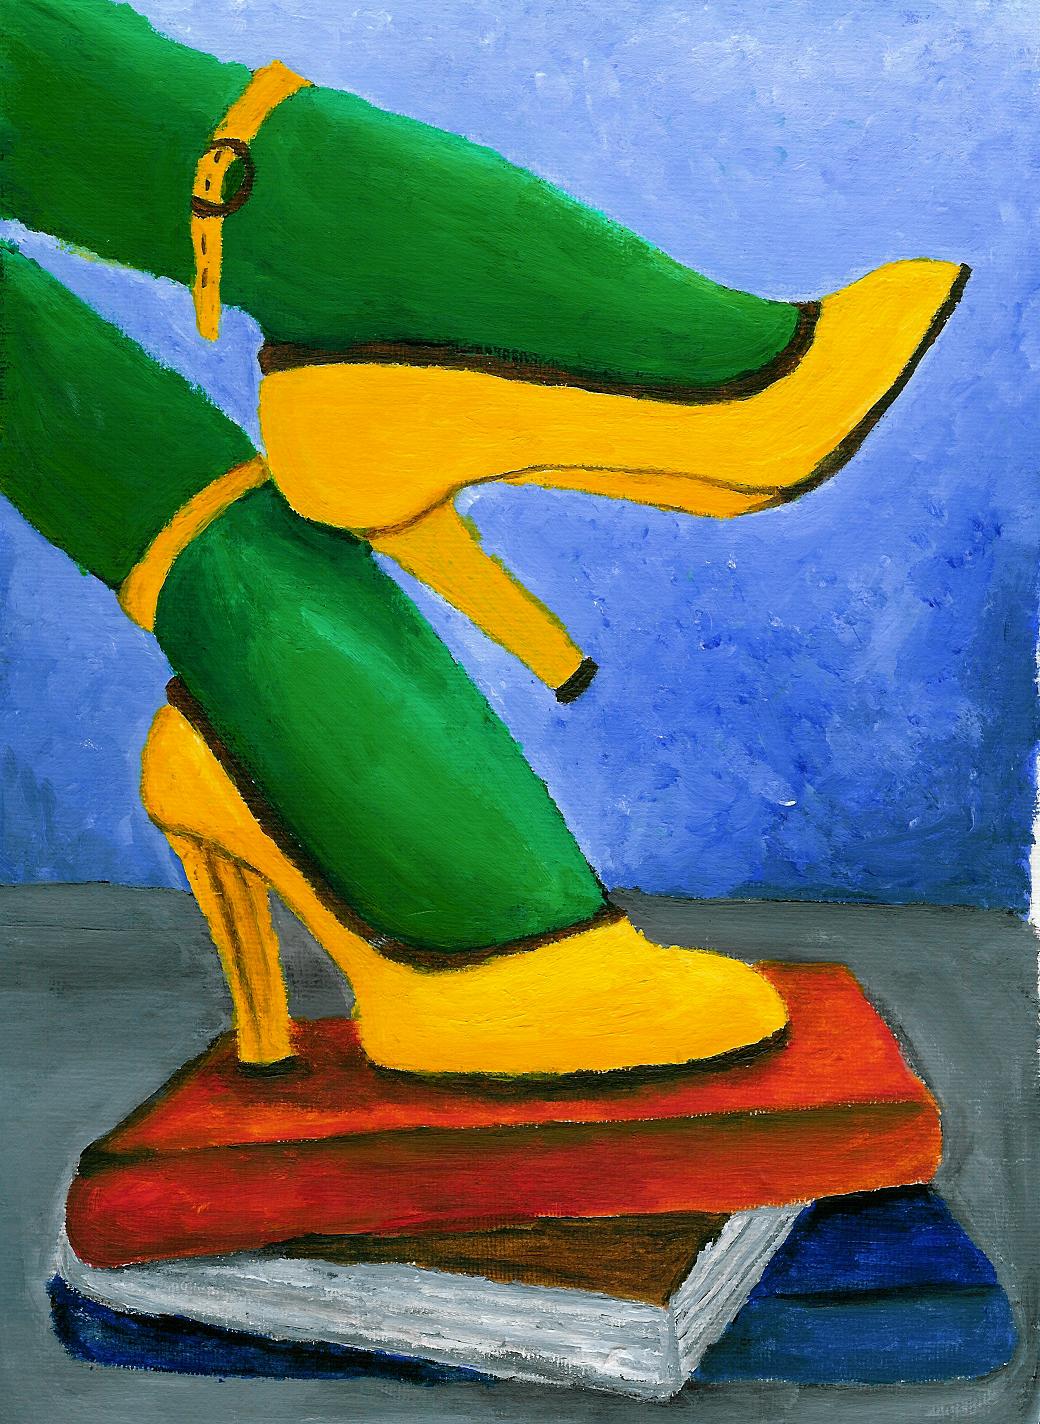 The Yellow Heels" by G_A_M